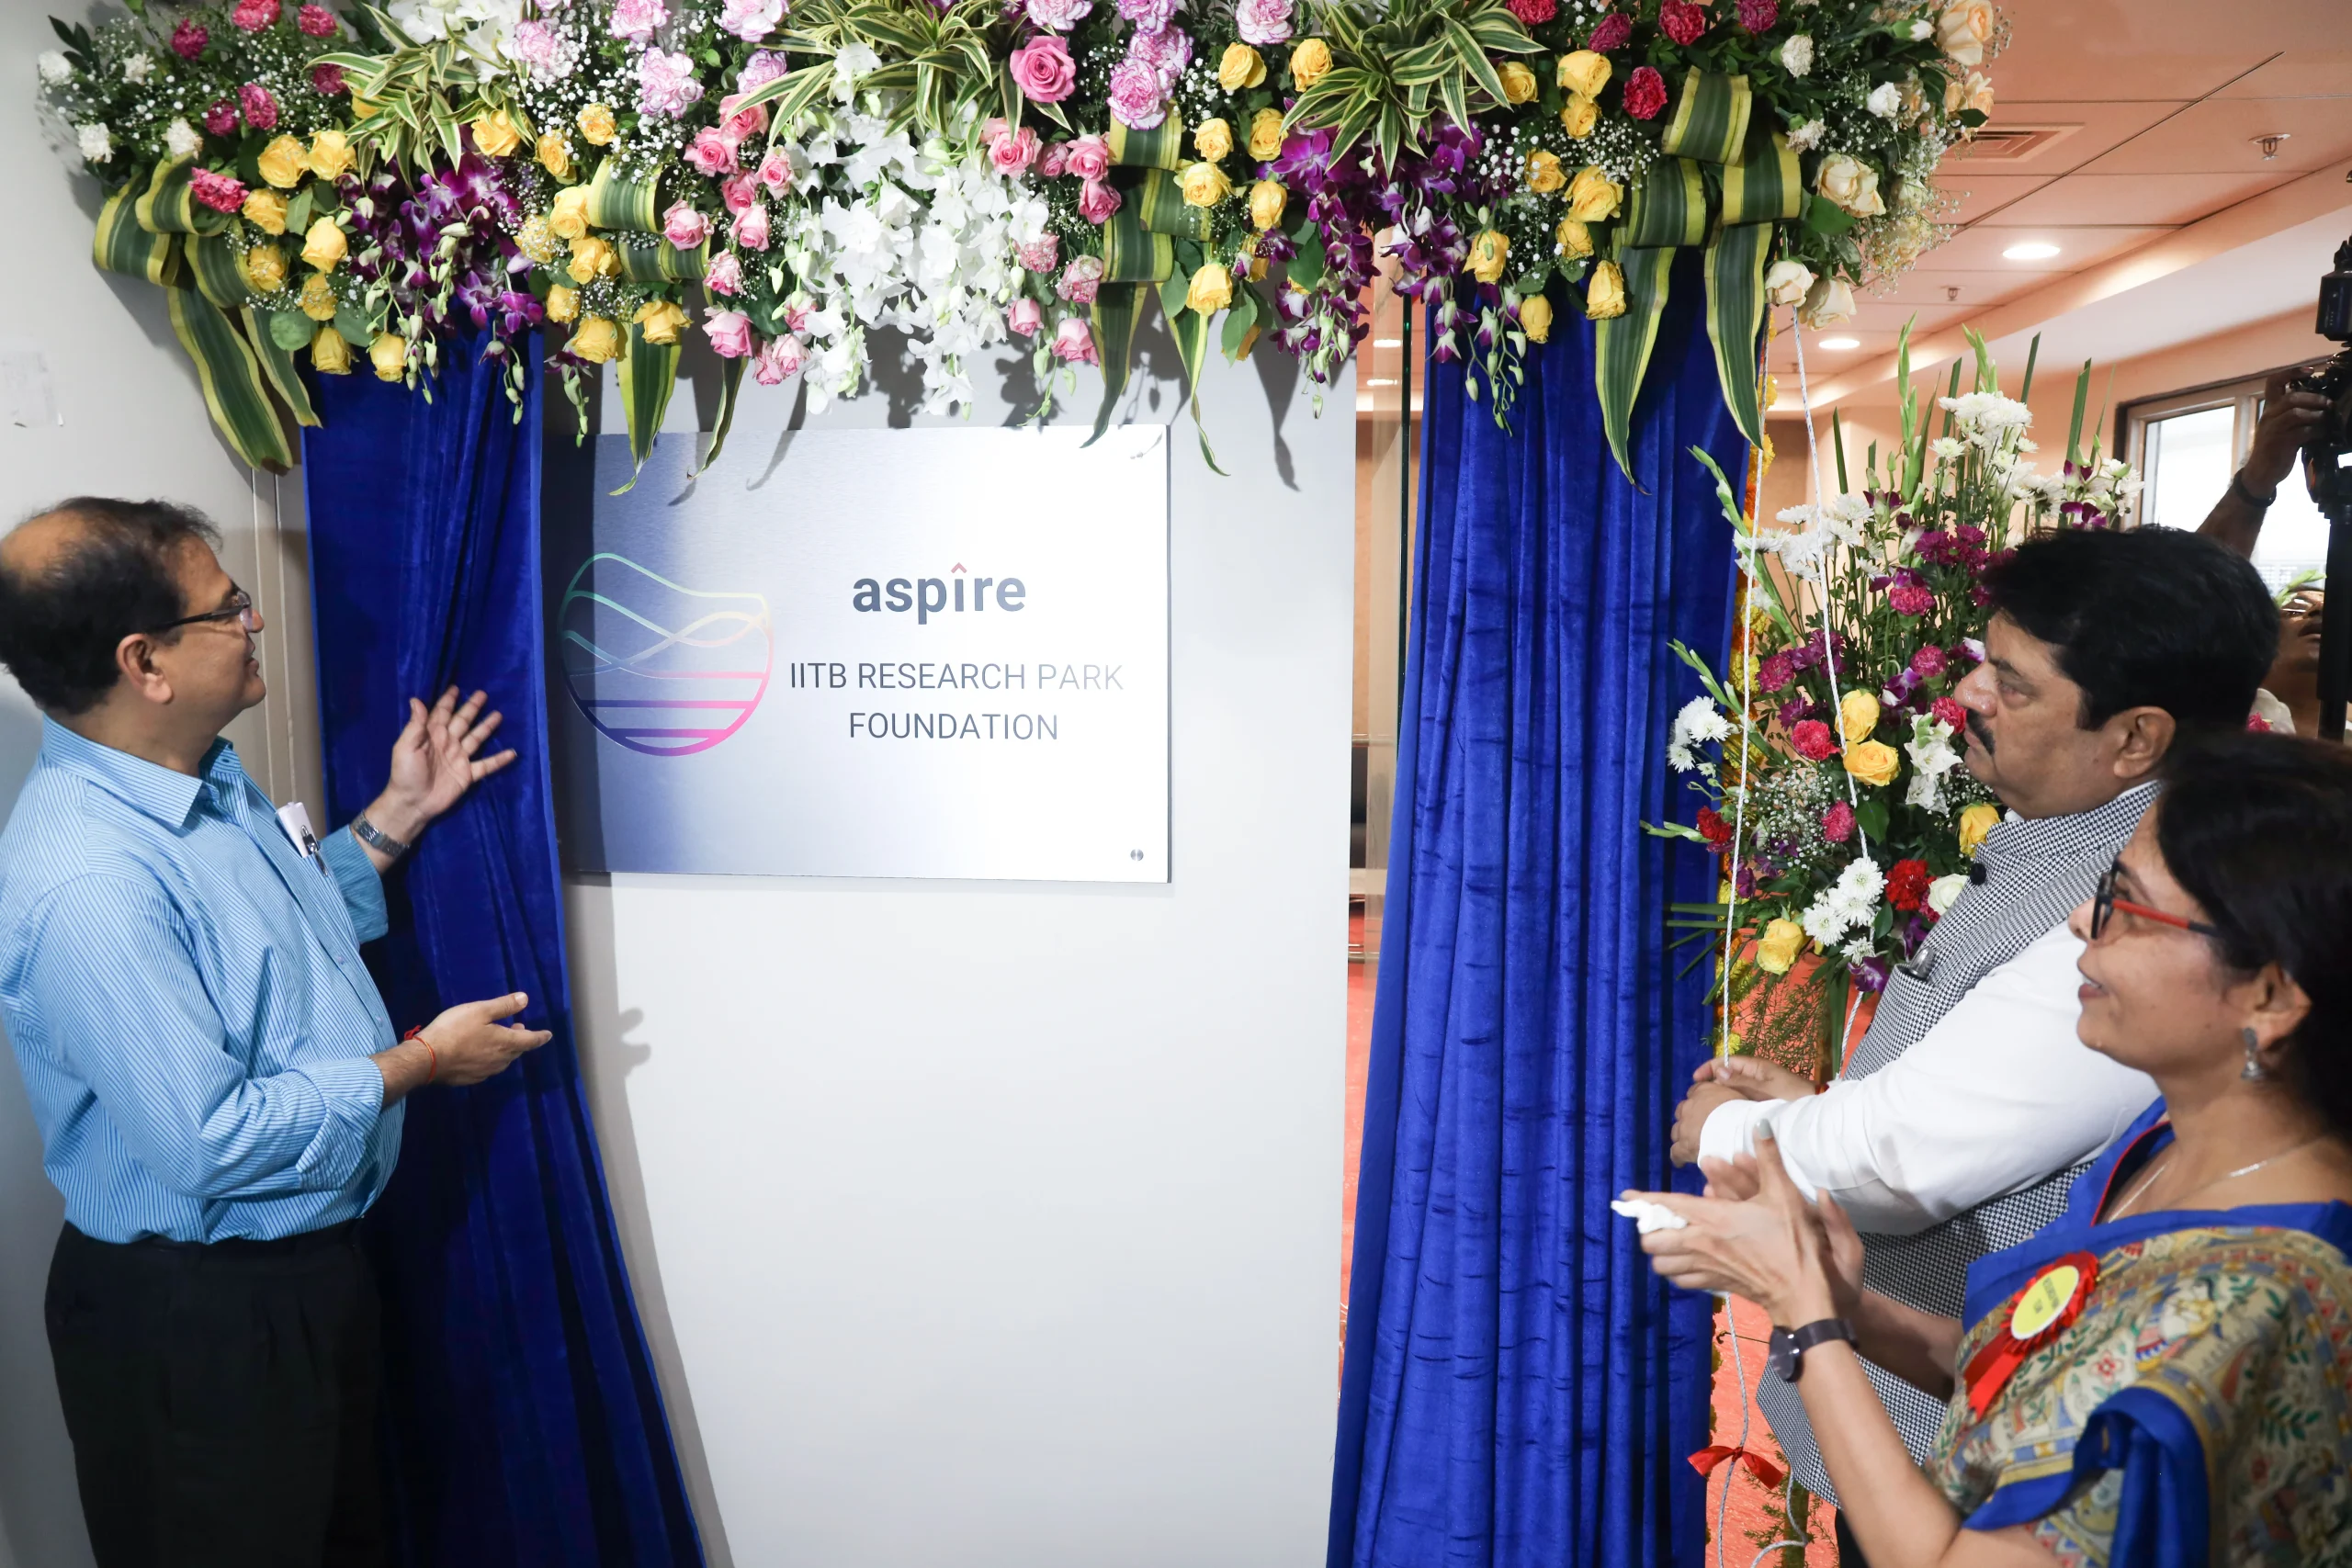 Inauguration of ASPIRE – IIT Bombay Research Park Foundation building